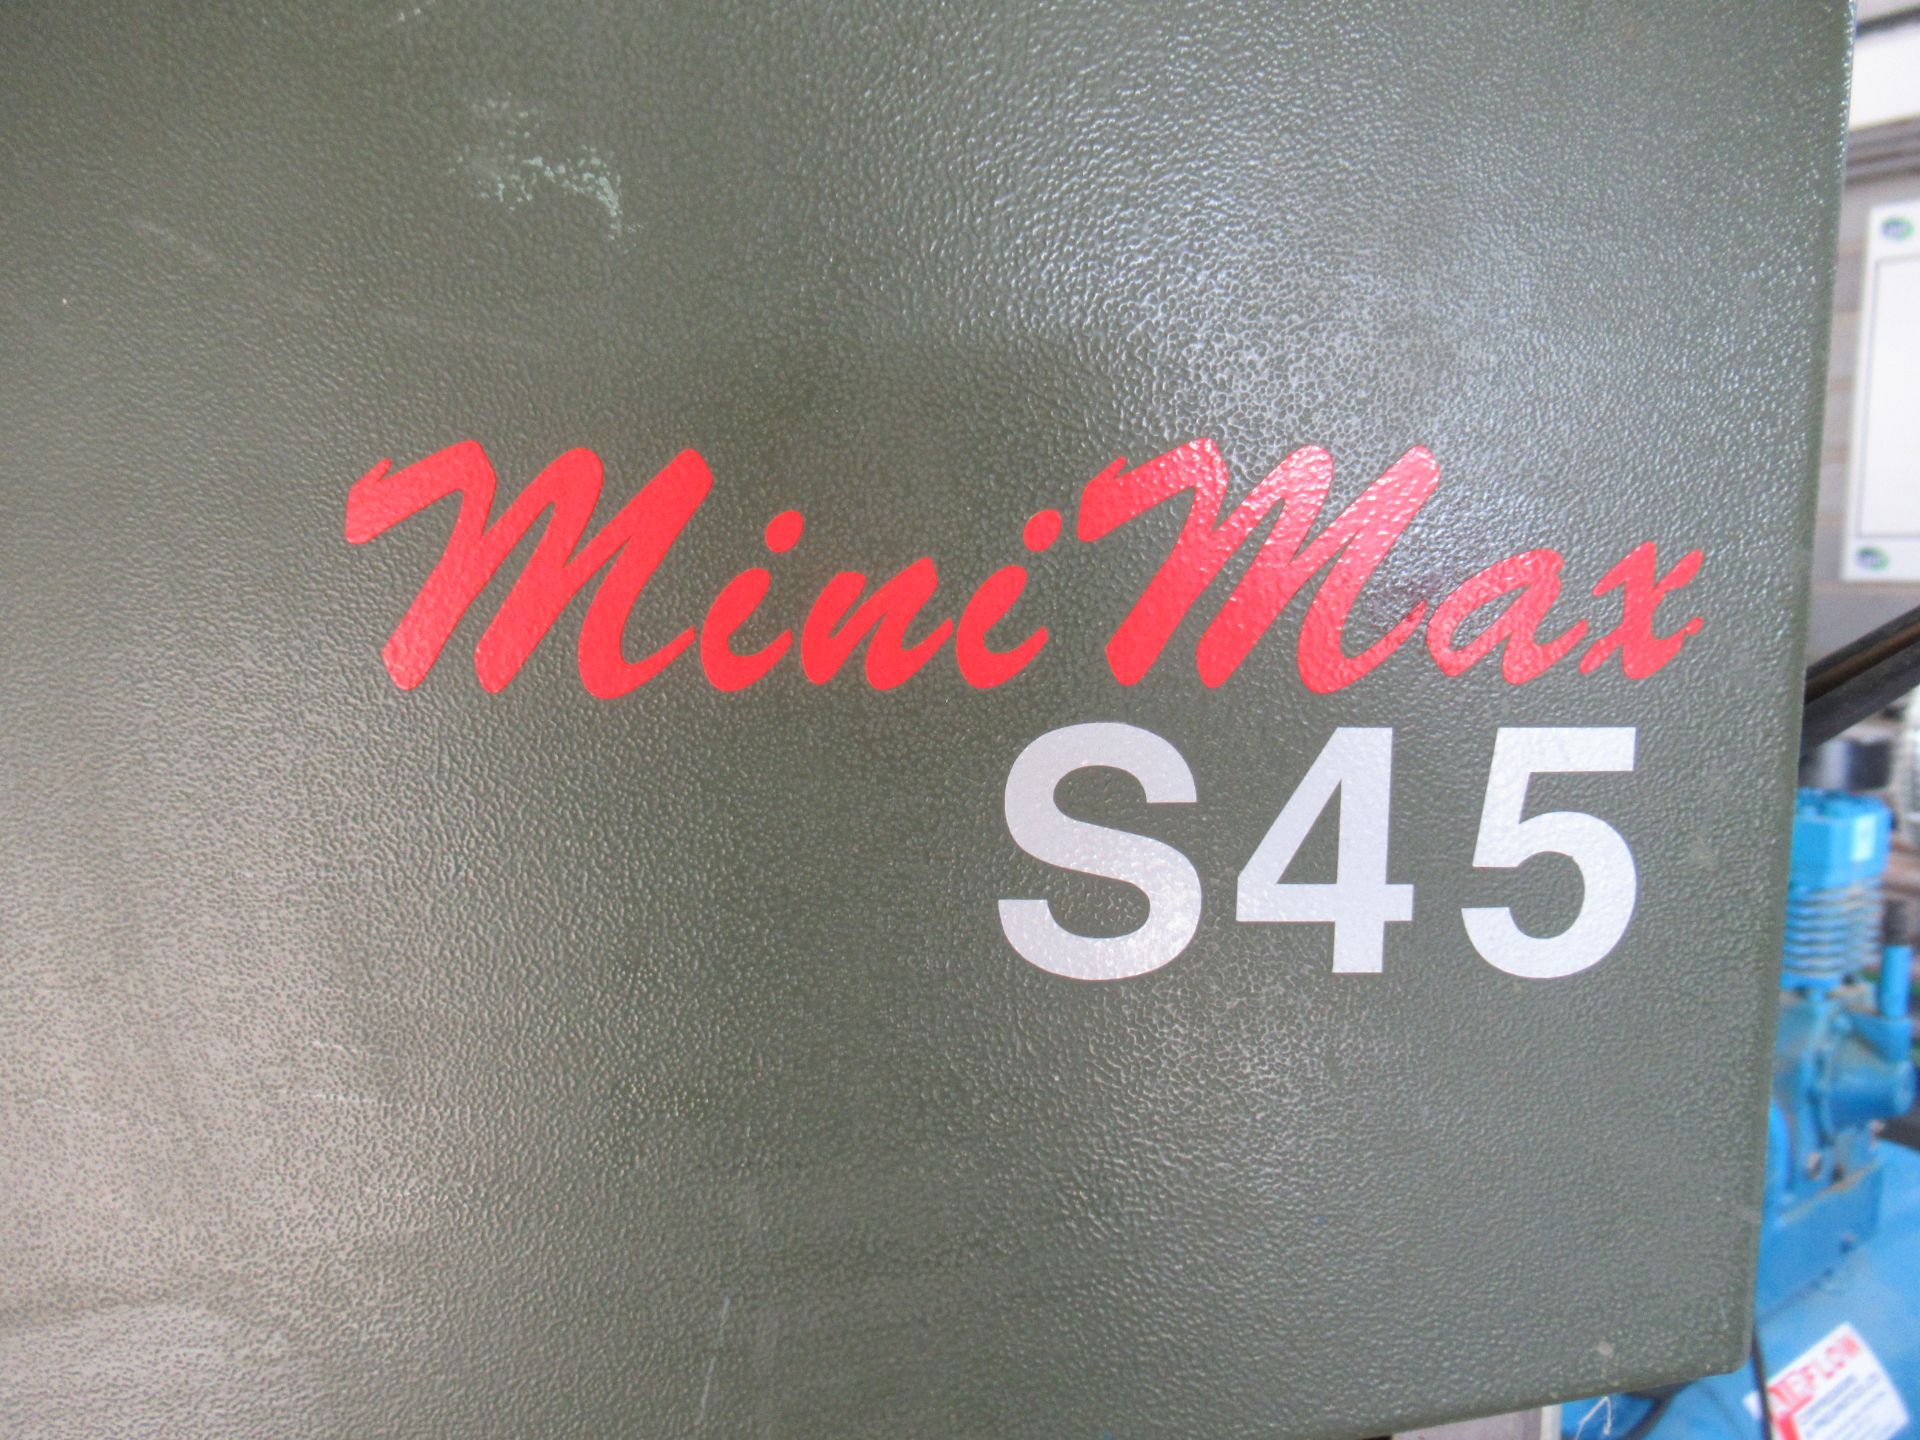 A Minimax S45 Bandsaw - 3ph - Image 4 of 6